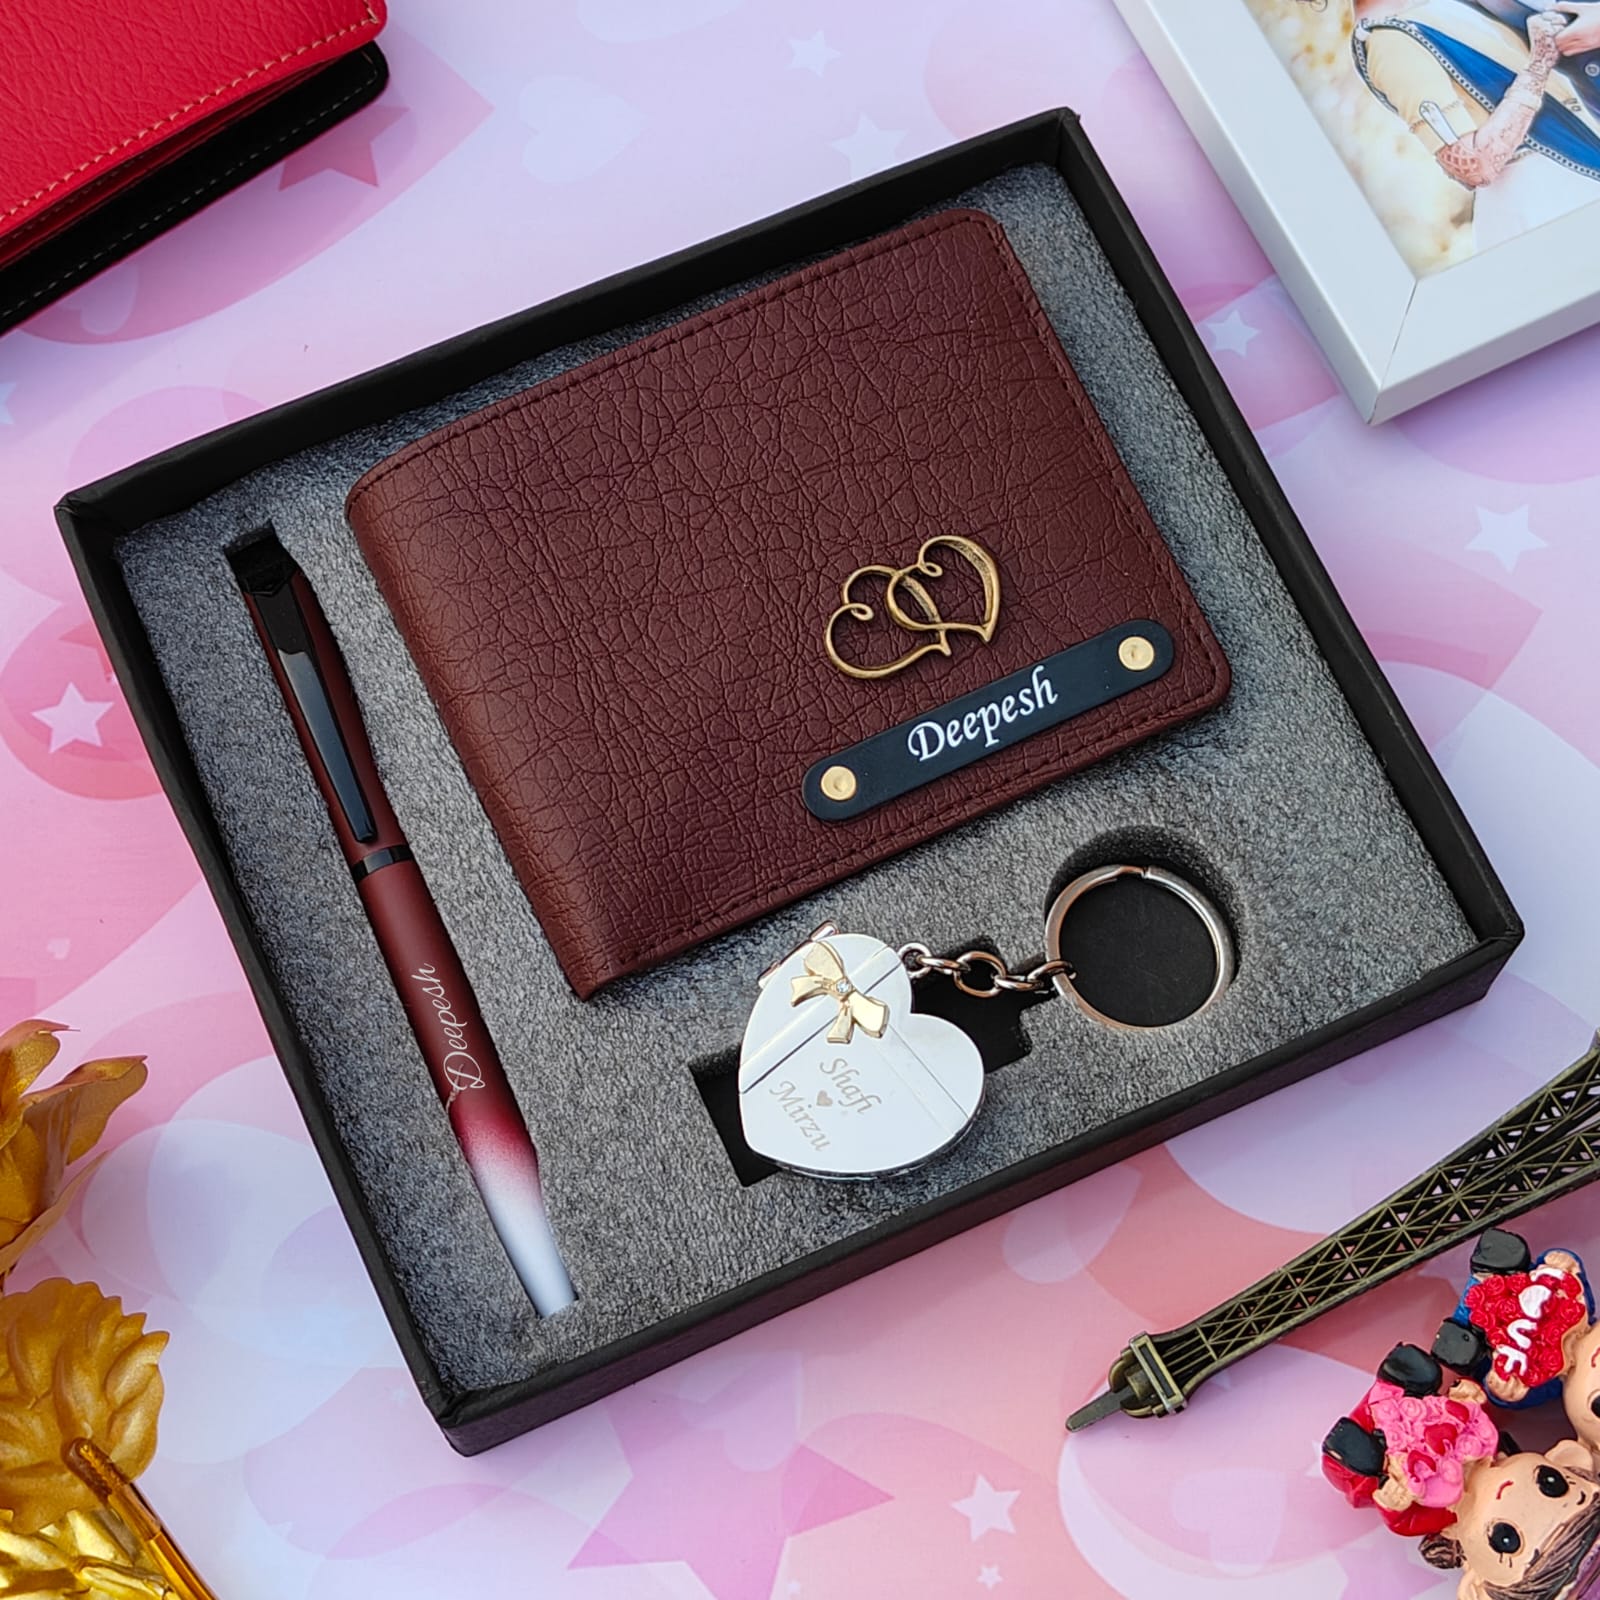 Luxury Valentine's Day Gifts For That Special Person in Your Life